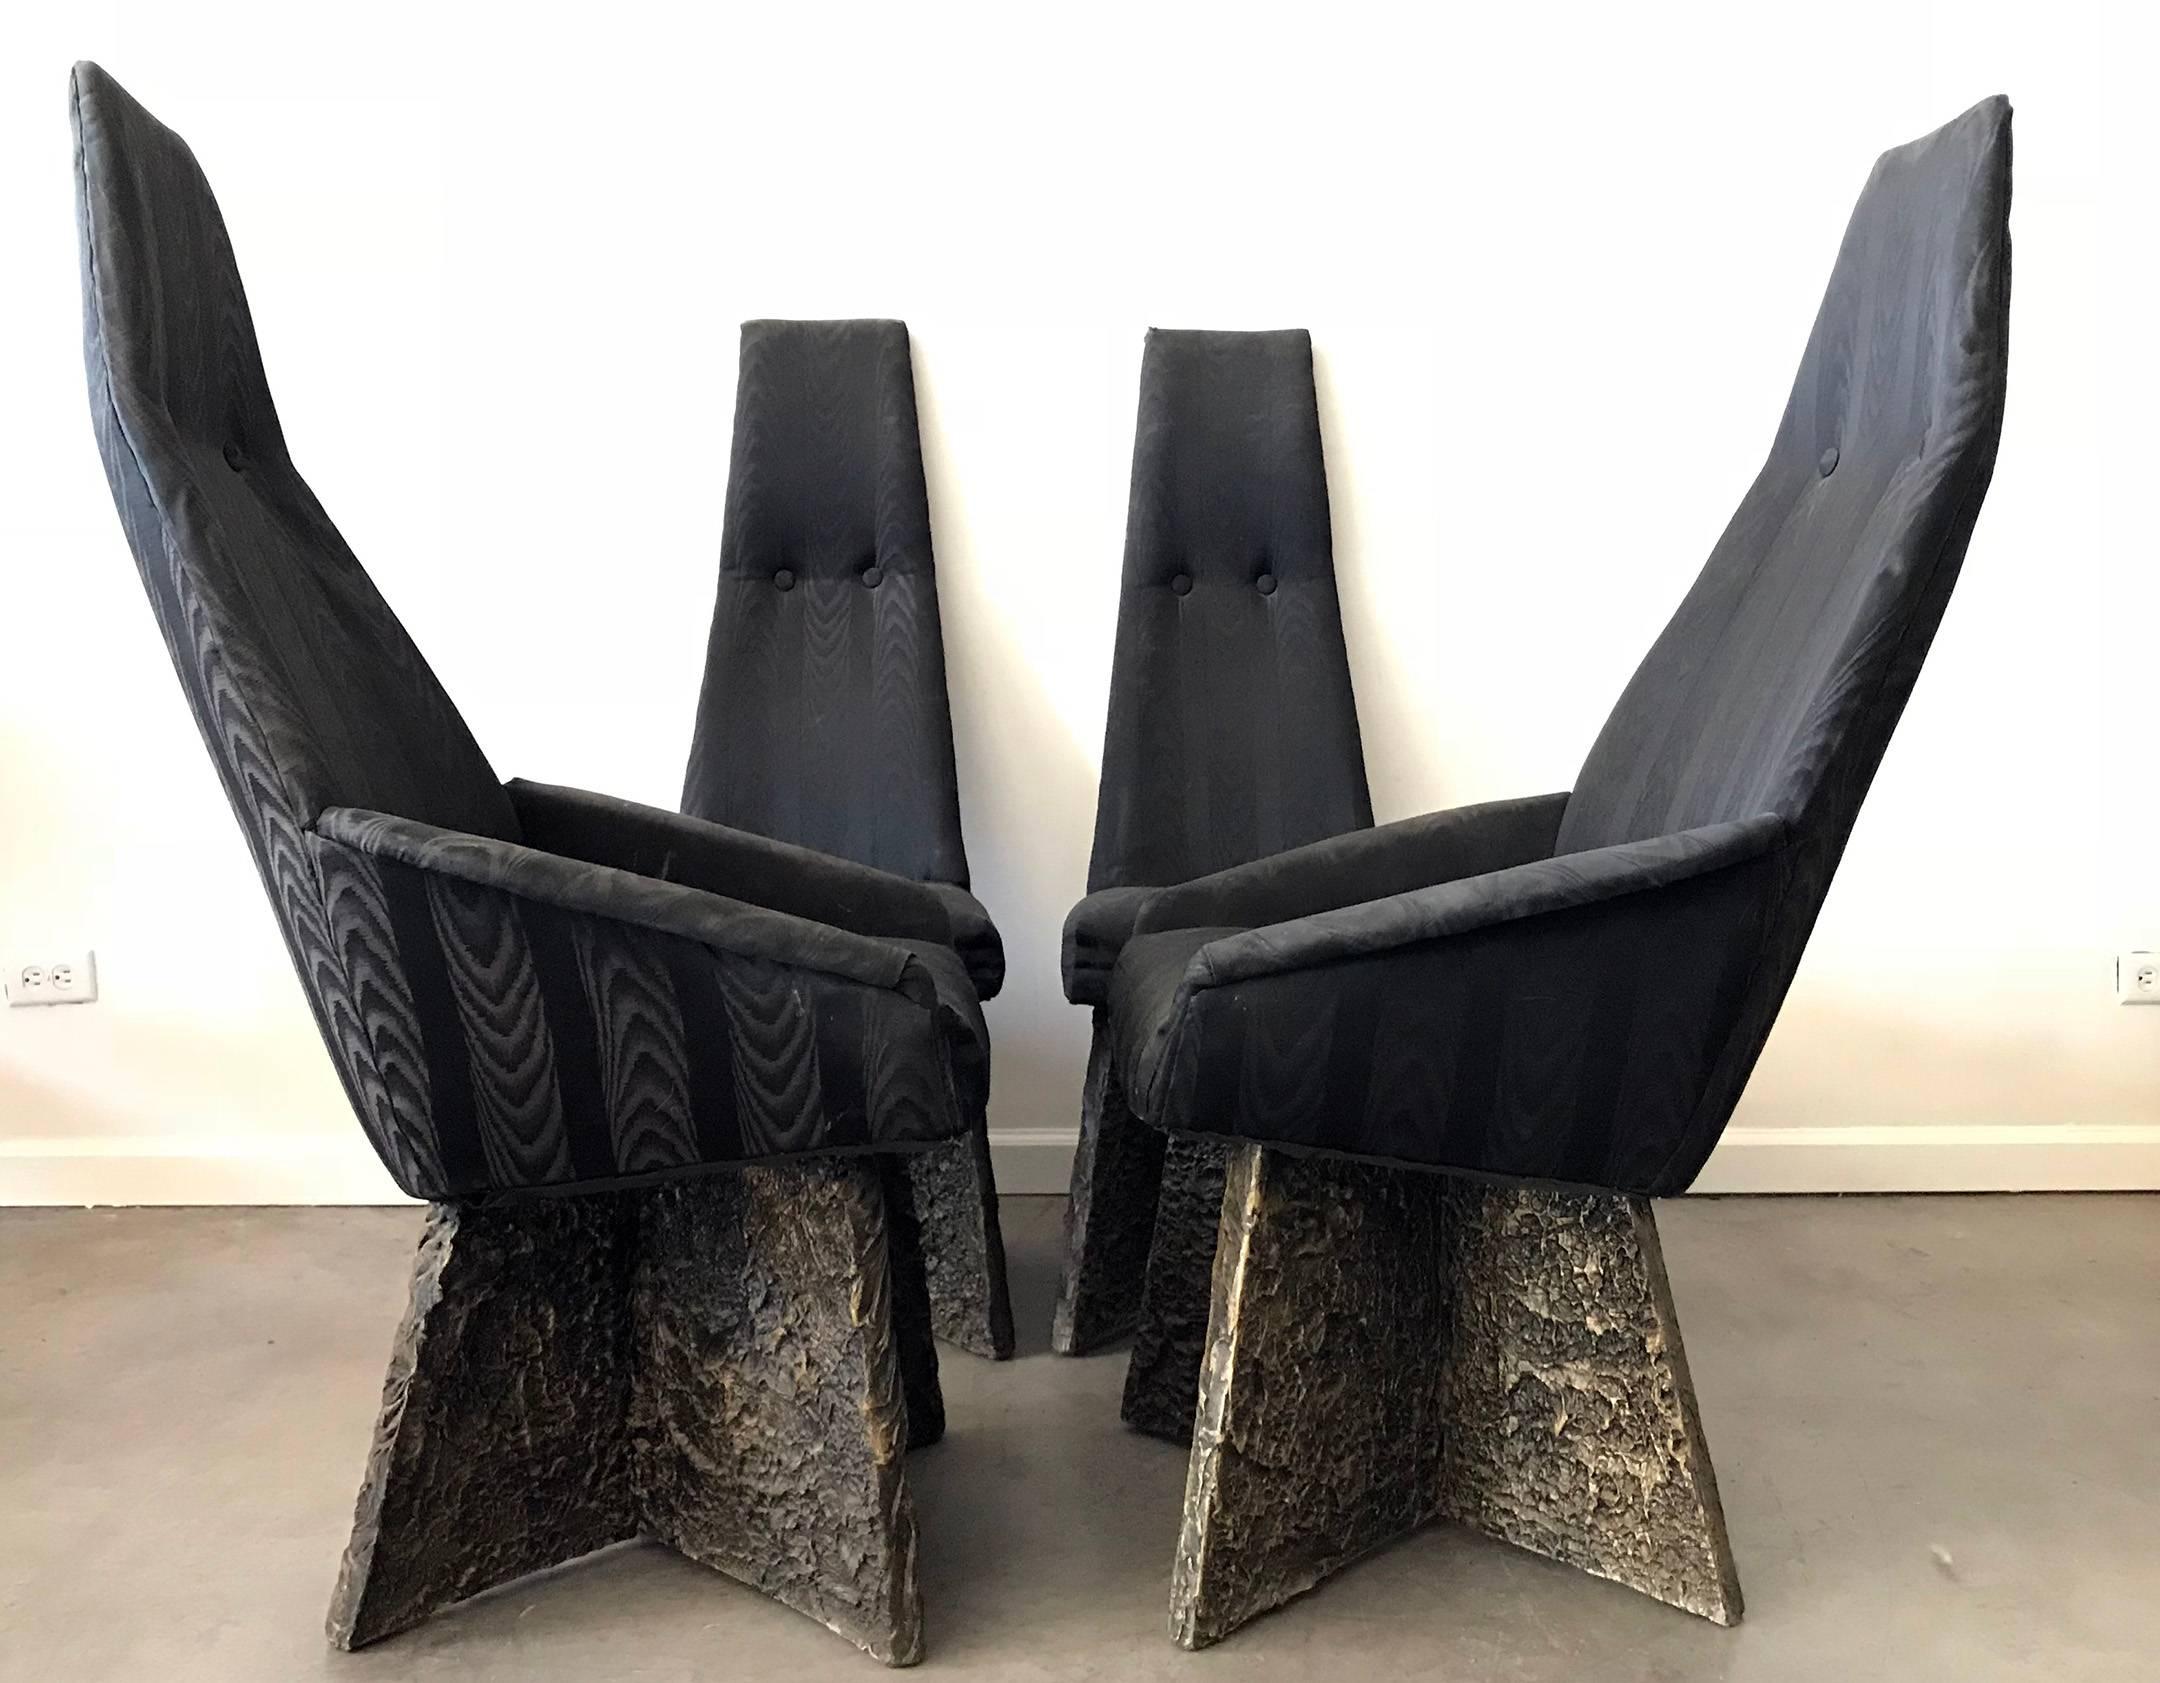 Available right now, we have a stunning set of four Adrian Pearsall for Craft Associates Brutalist dining chairs. In the style of Paul Evans, these Brutalist chairs are a moulded resin over a solid wood frame and feature a gorgeous high back